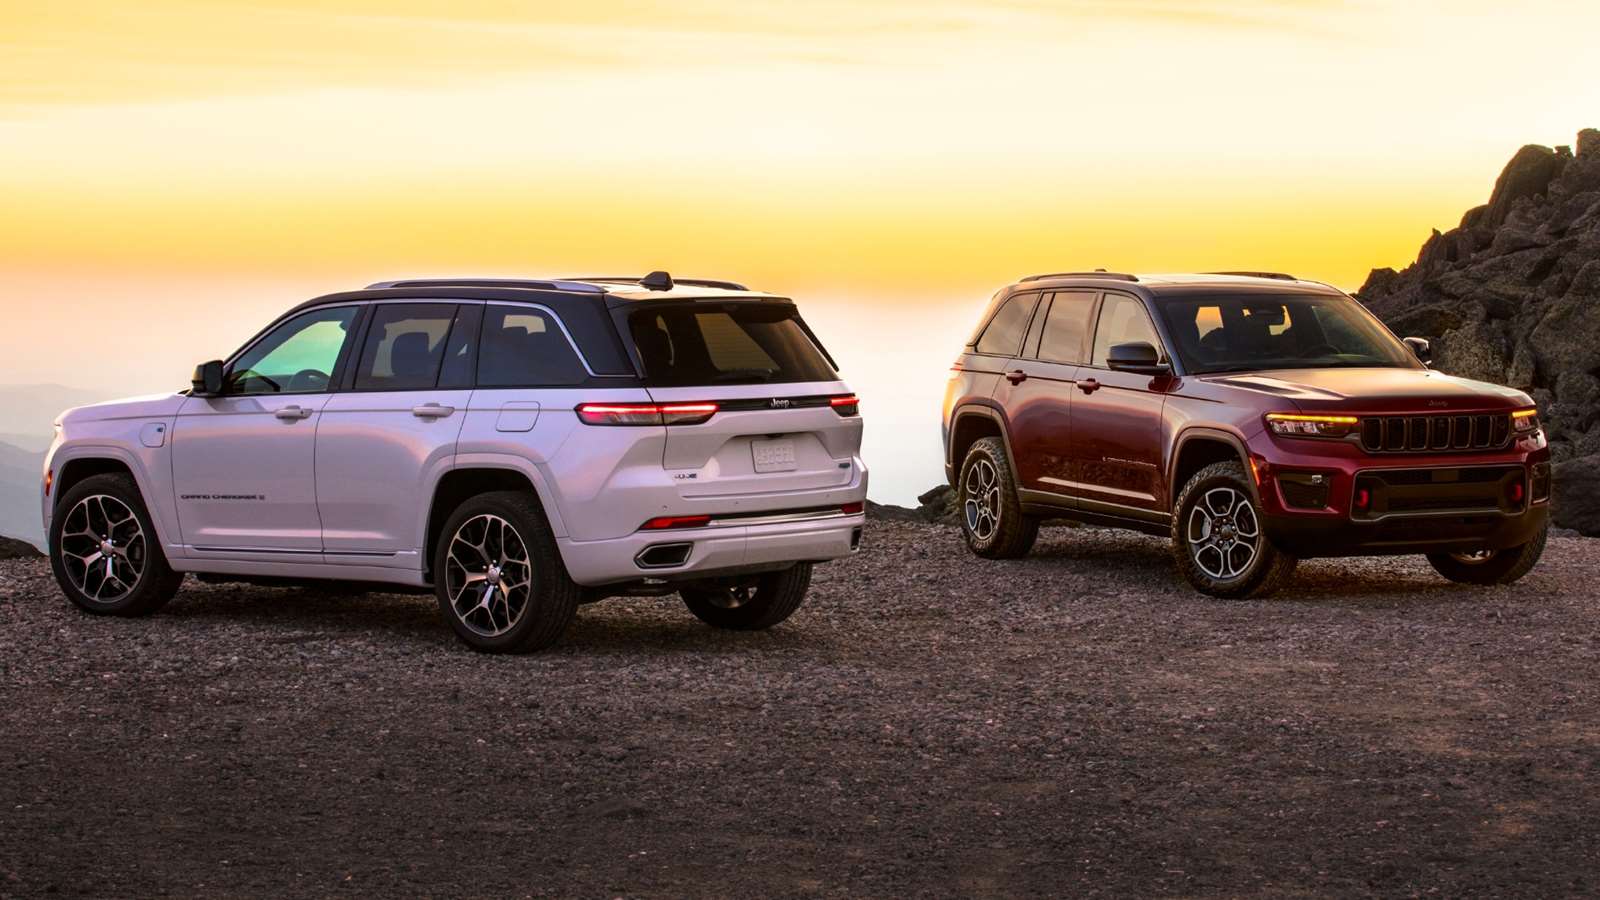 The 2022 Jeep Grand Cherokee is ready to go electric